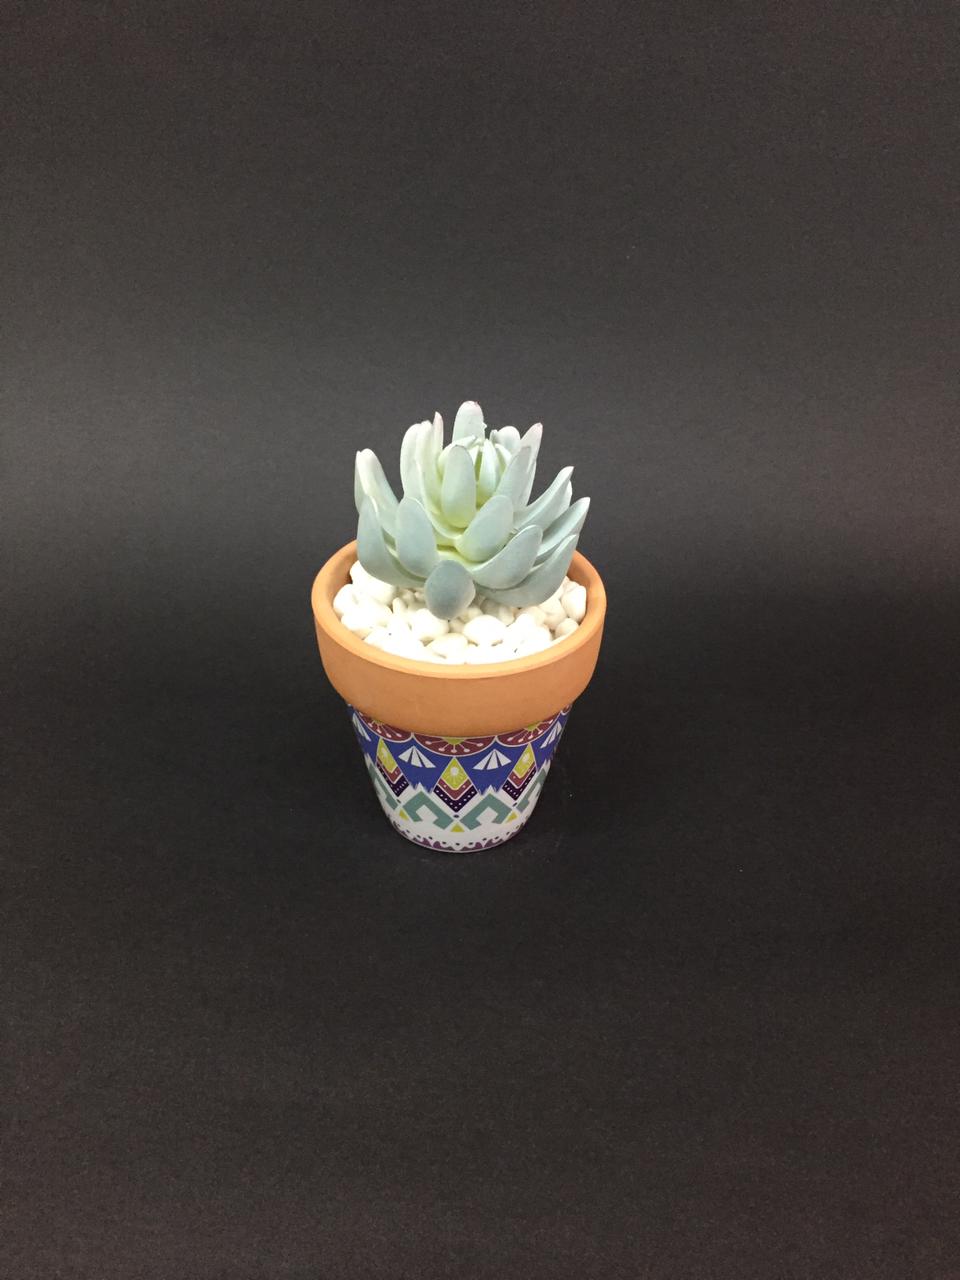 Amazing Designer Terracotta Pots With Various Indoor Succulents By Tamrapatra